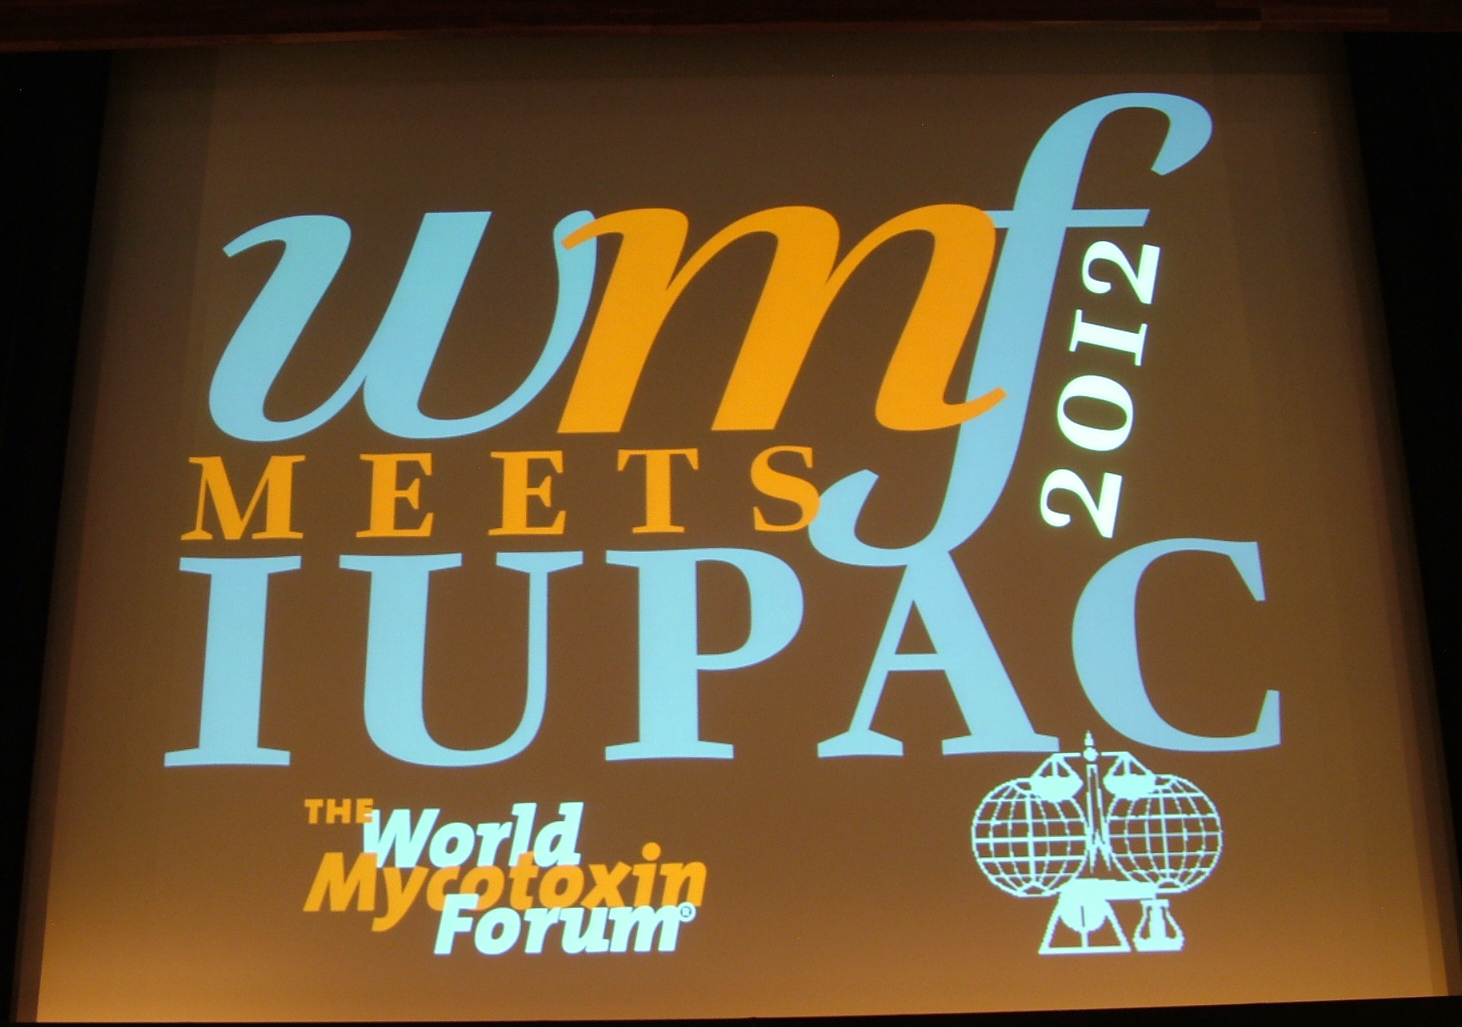 The 7th Conference of The World Mycotoxin Forum and the XIIIth IUPAC International Symposium on Mycotoxins and Phycotoxins in 2012 were jointly organised under the event name:  WMFmeetsIUPAC  on 5-9 November 2012